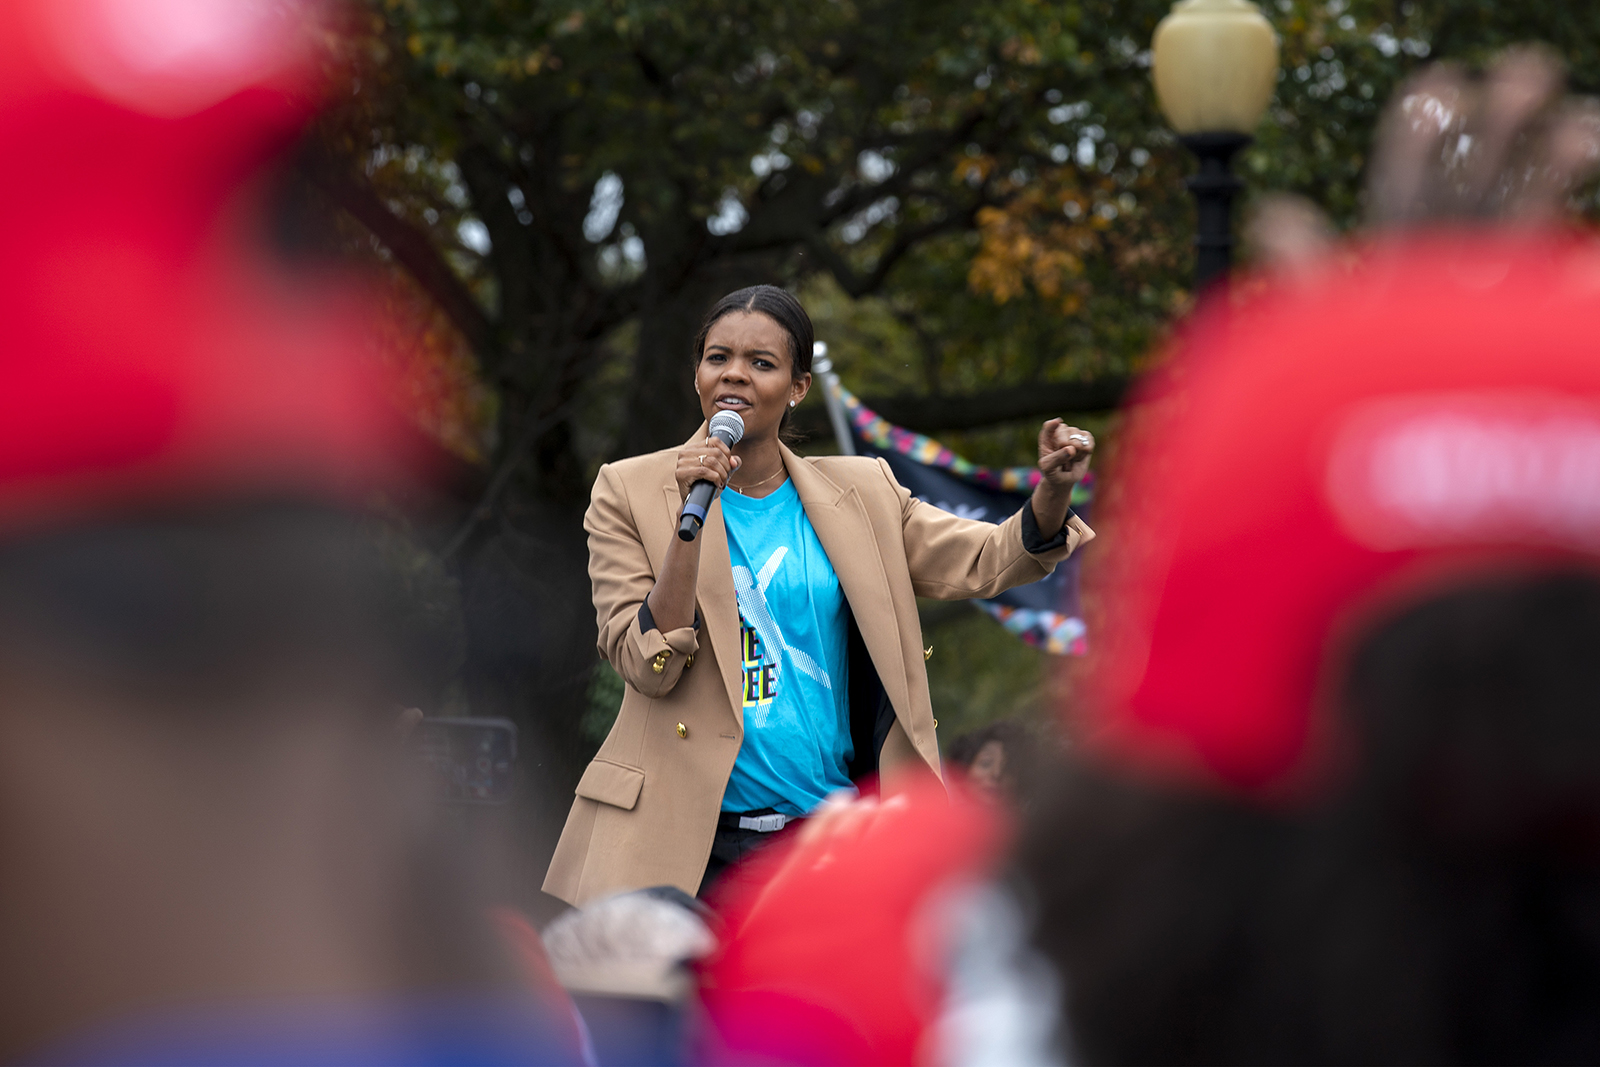 Conservative commentator and political activist Candace Owens speaks during a rally on The Ellipse at the White House on Saturday, Oct. 10, 2020, in Washington. (AP Photo/Jose Luis Magana)